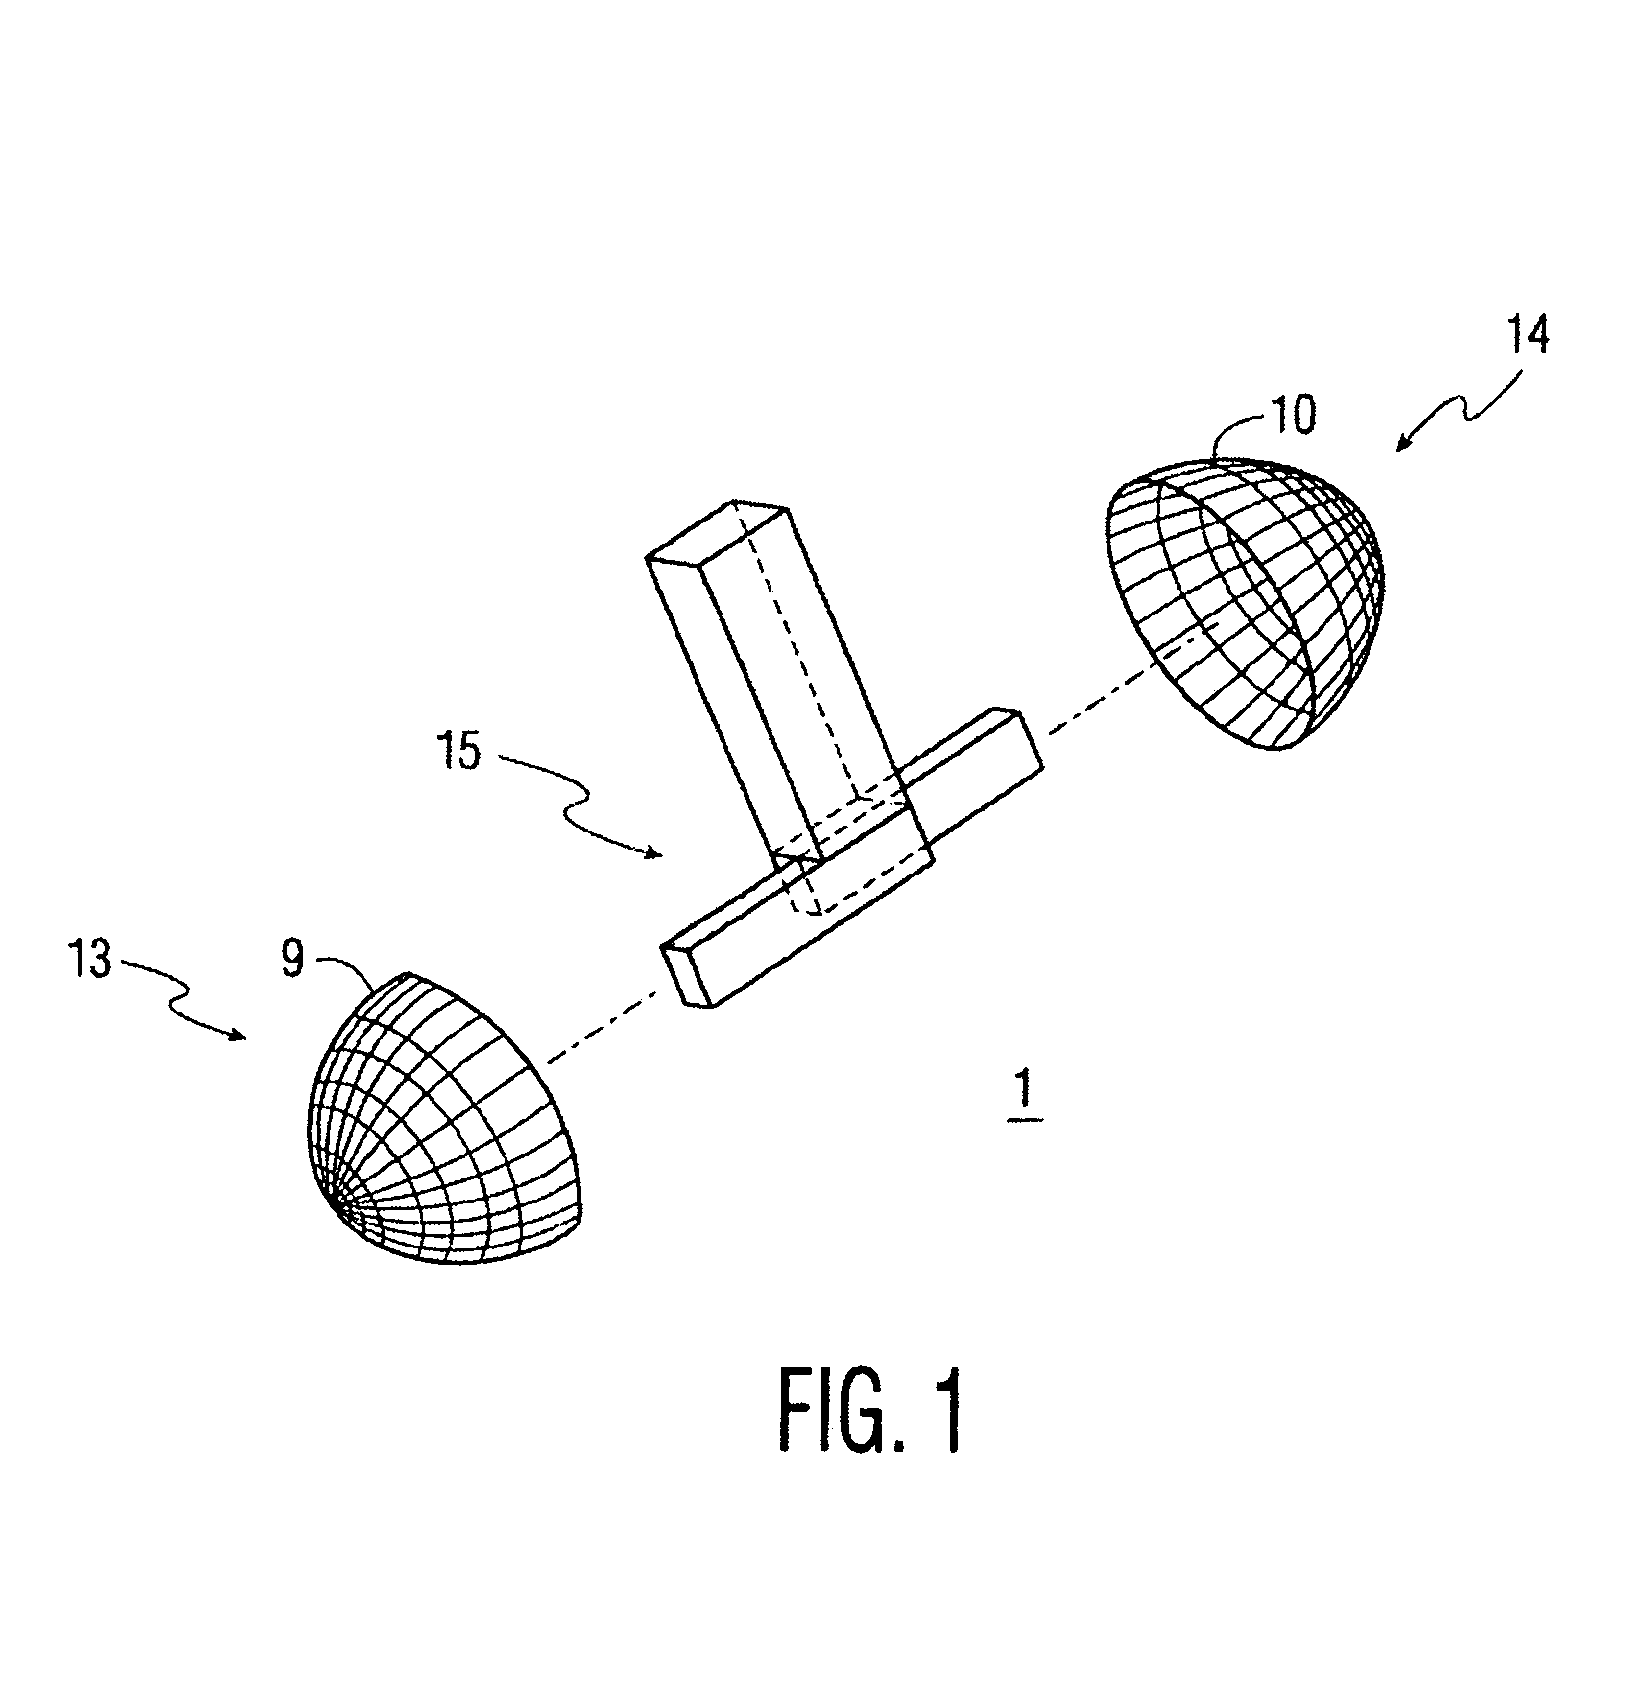 Multiple lamp illumination system with polarization recovery and integration